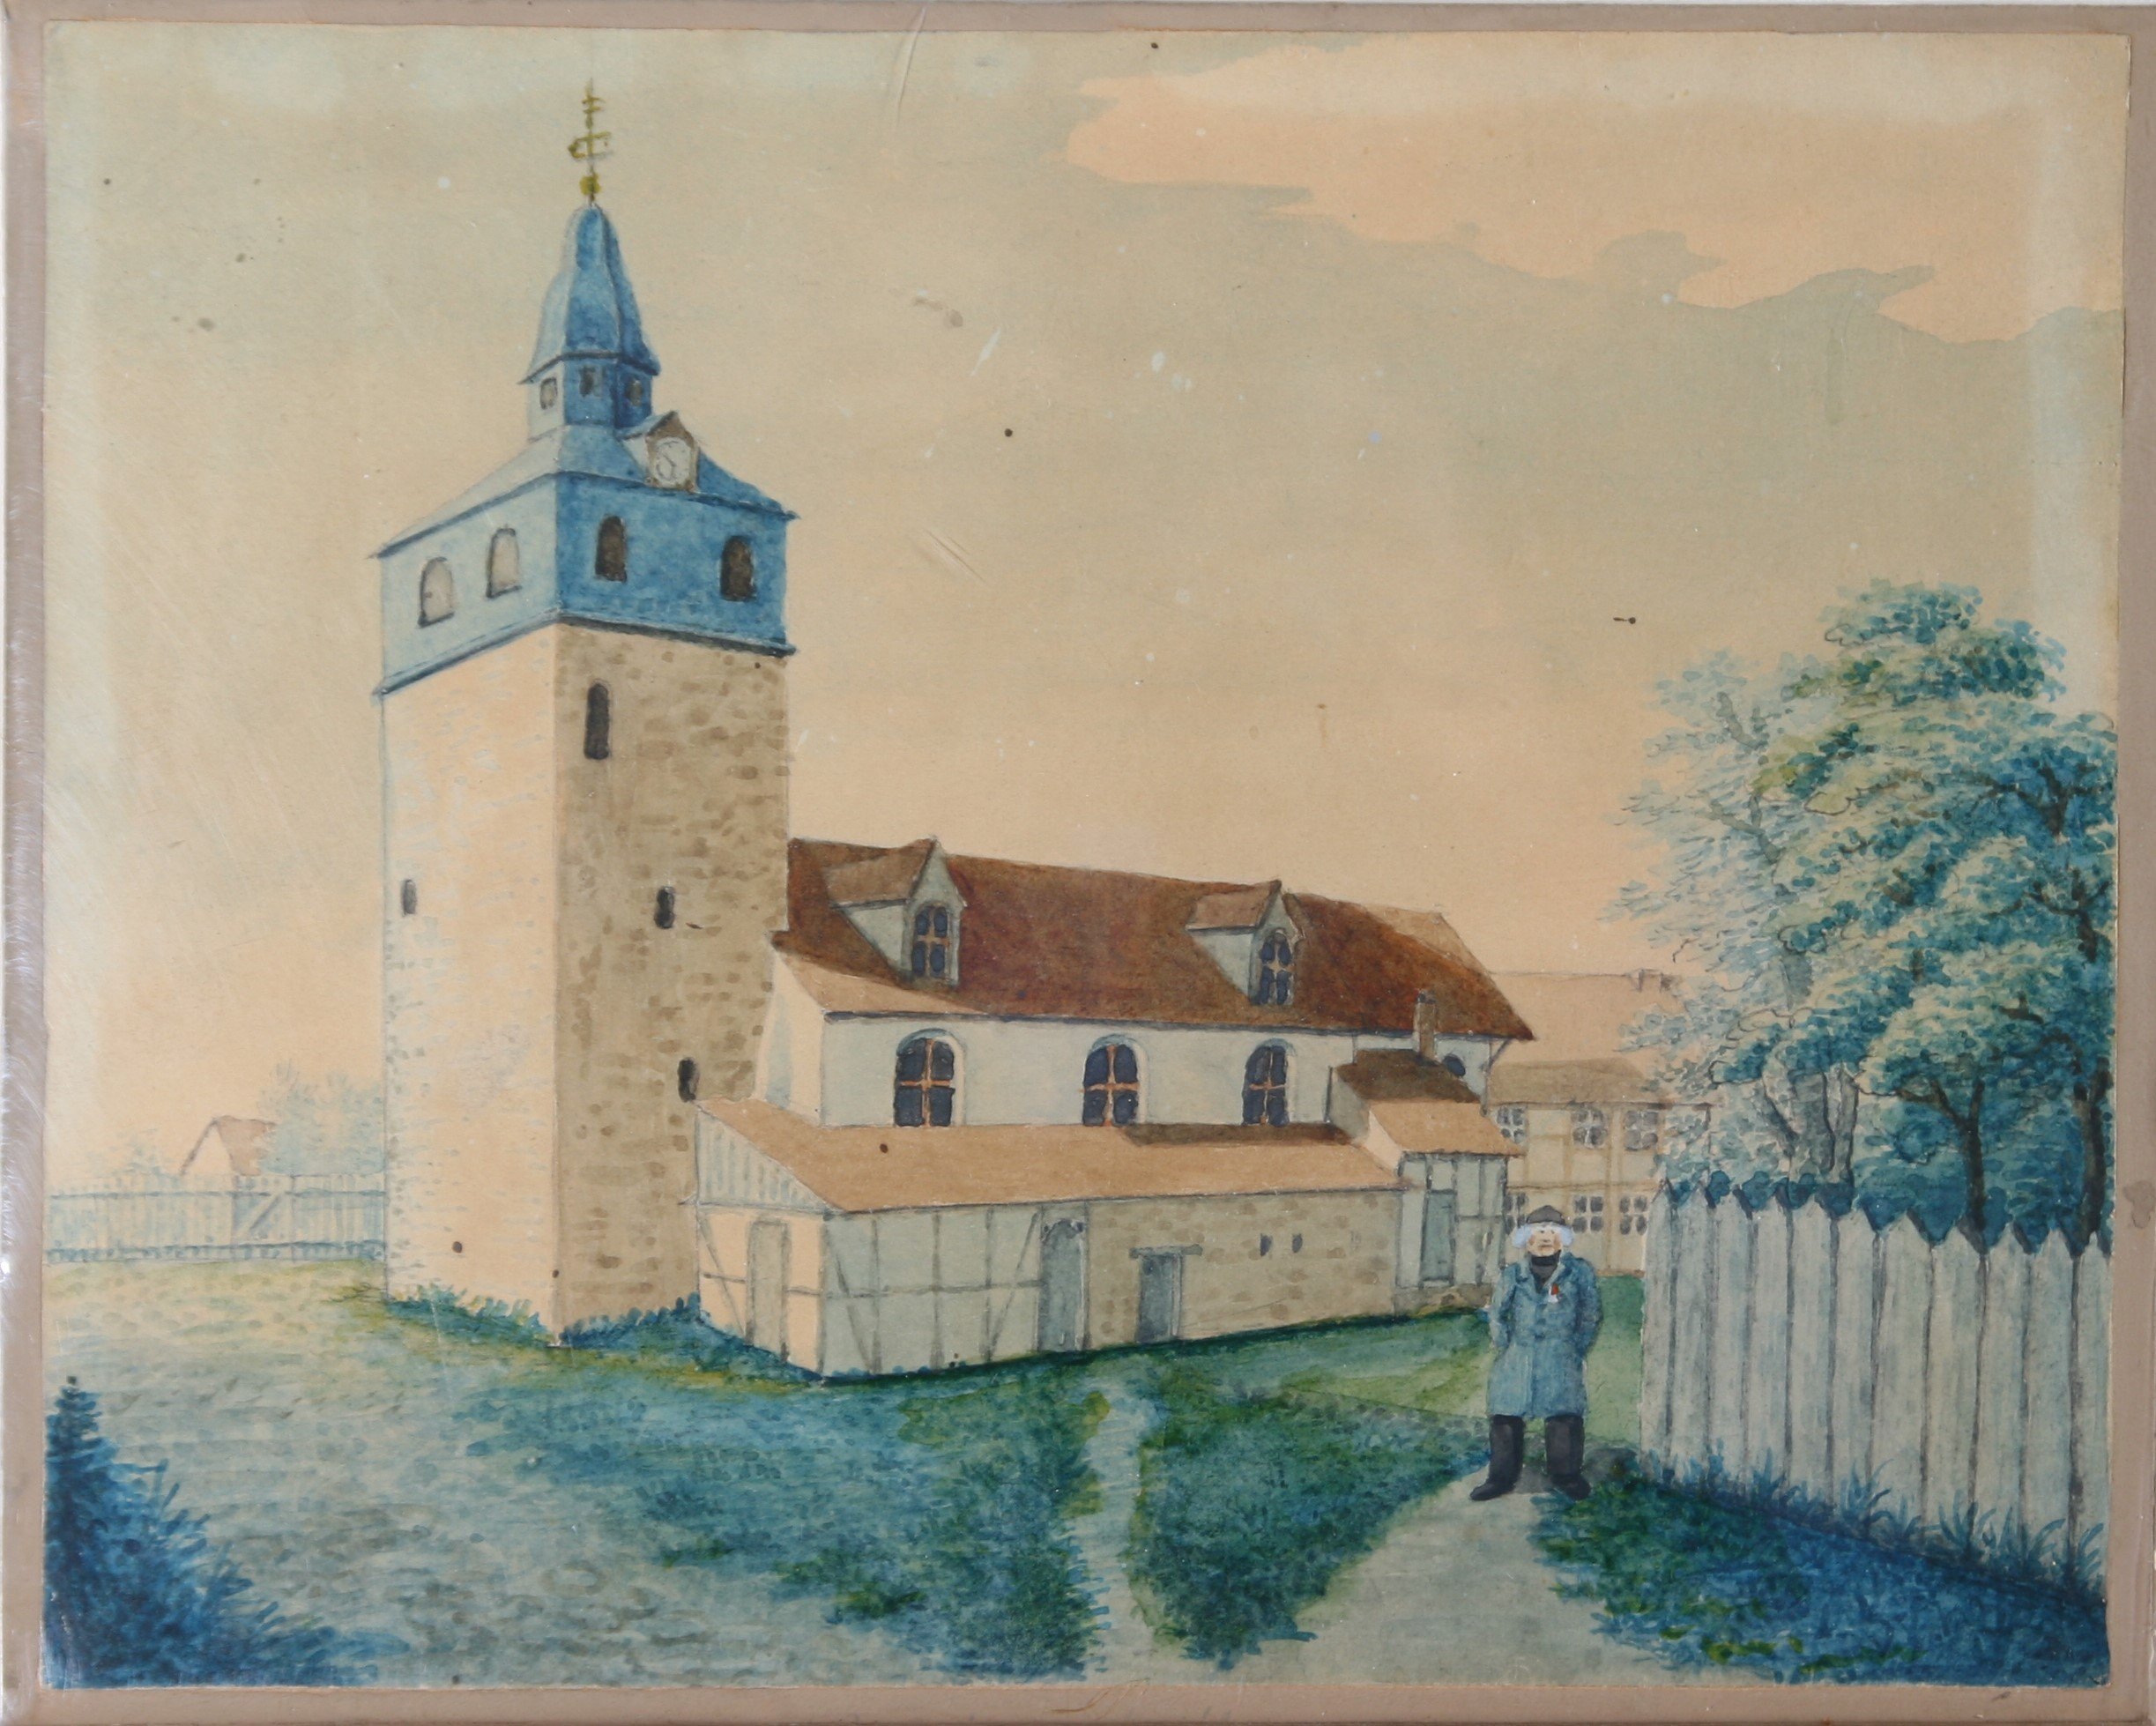 Kirche in Veckenstedt, 1831 (Harzmuseum Wernigerode CC BY-NC-SA)